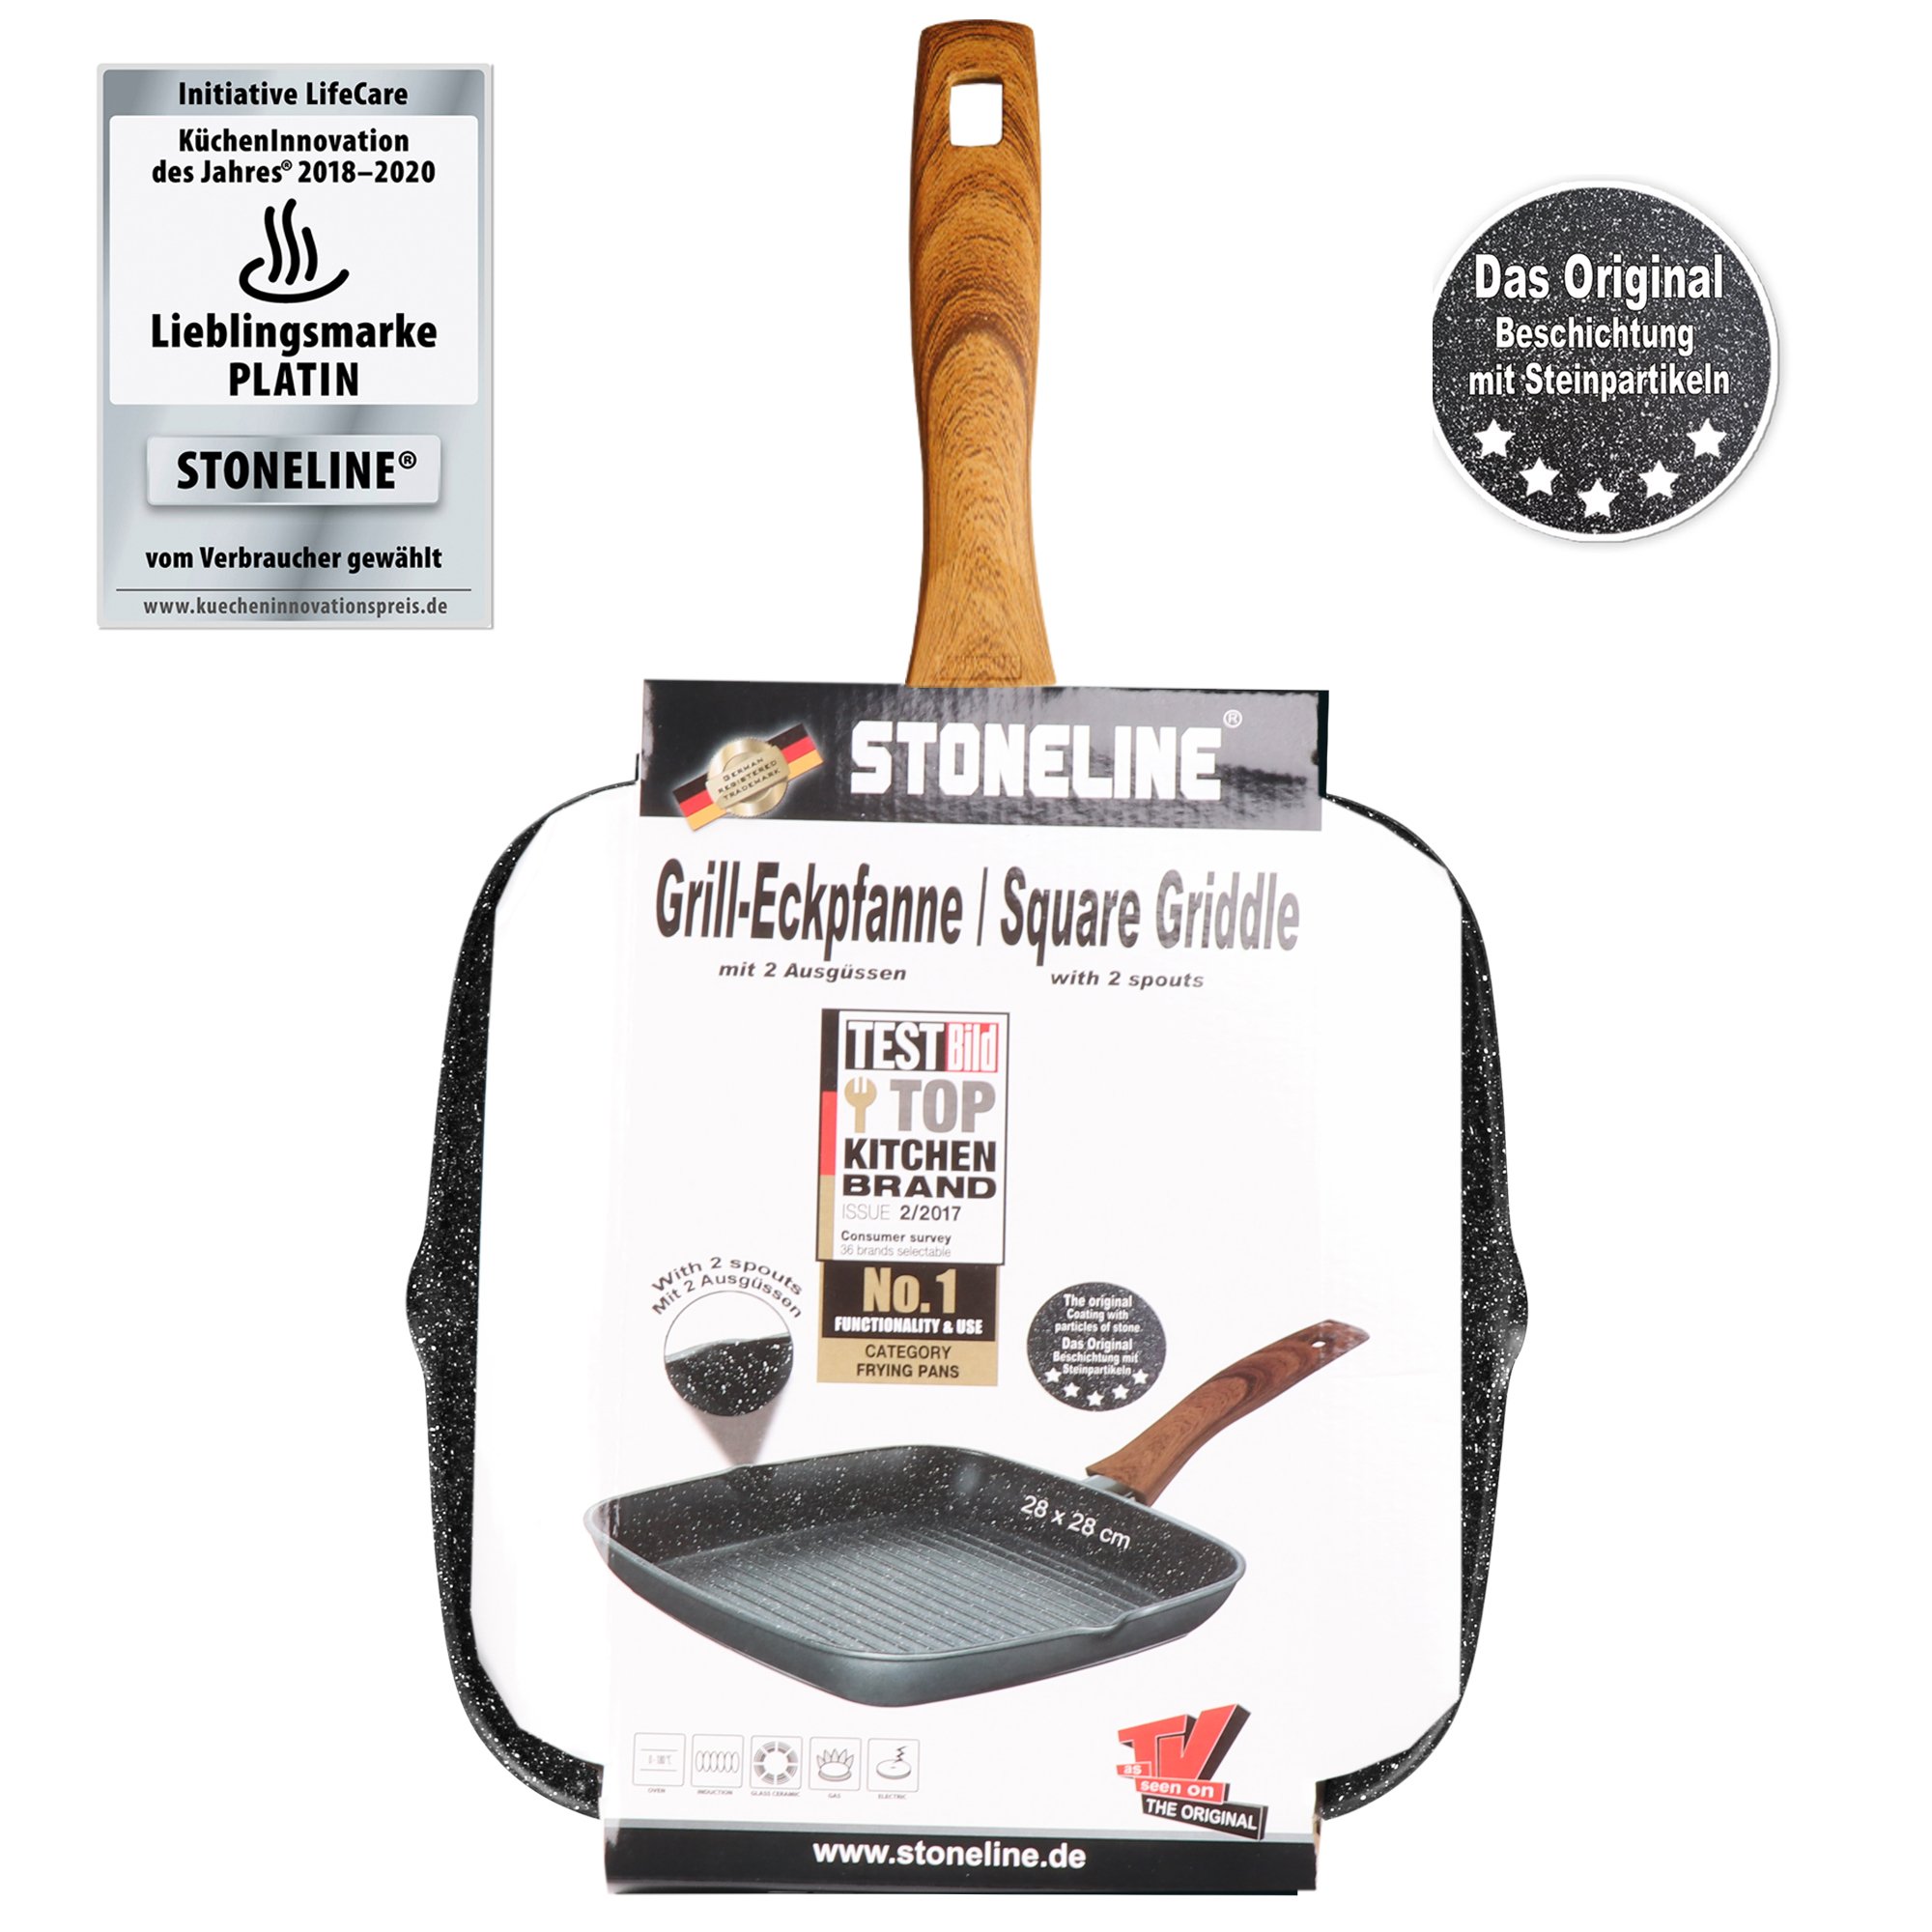 STONELINE® Back to Nature grill pan 28 x 28 cm, with 2 spouts, induction and oven-safe